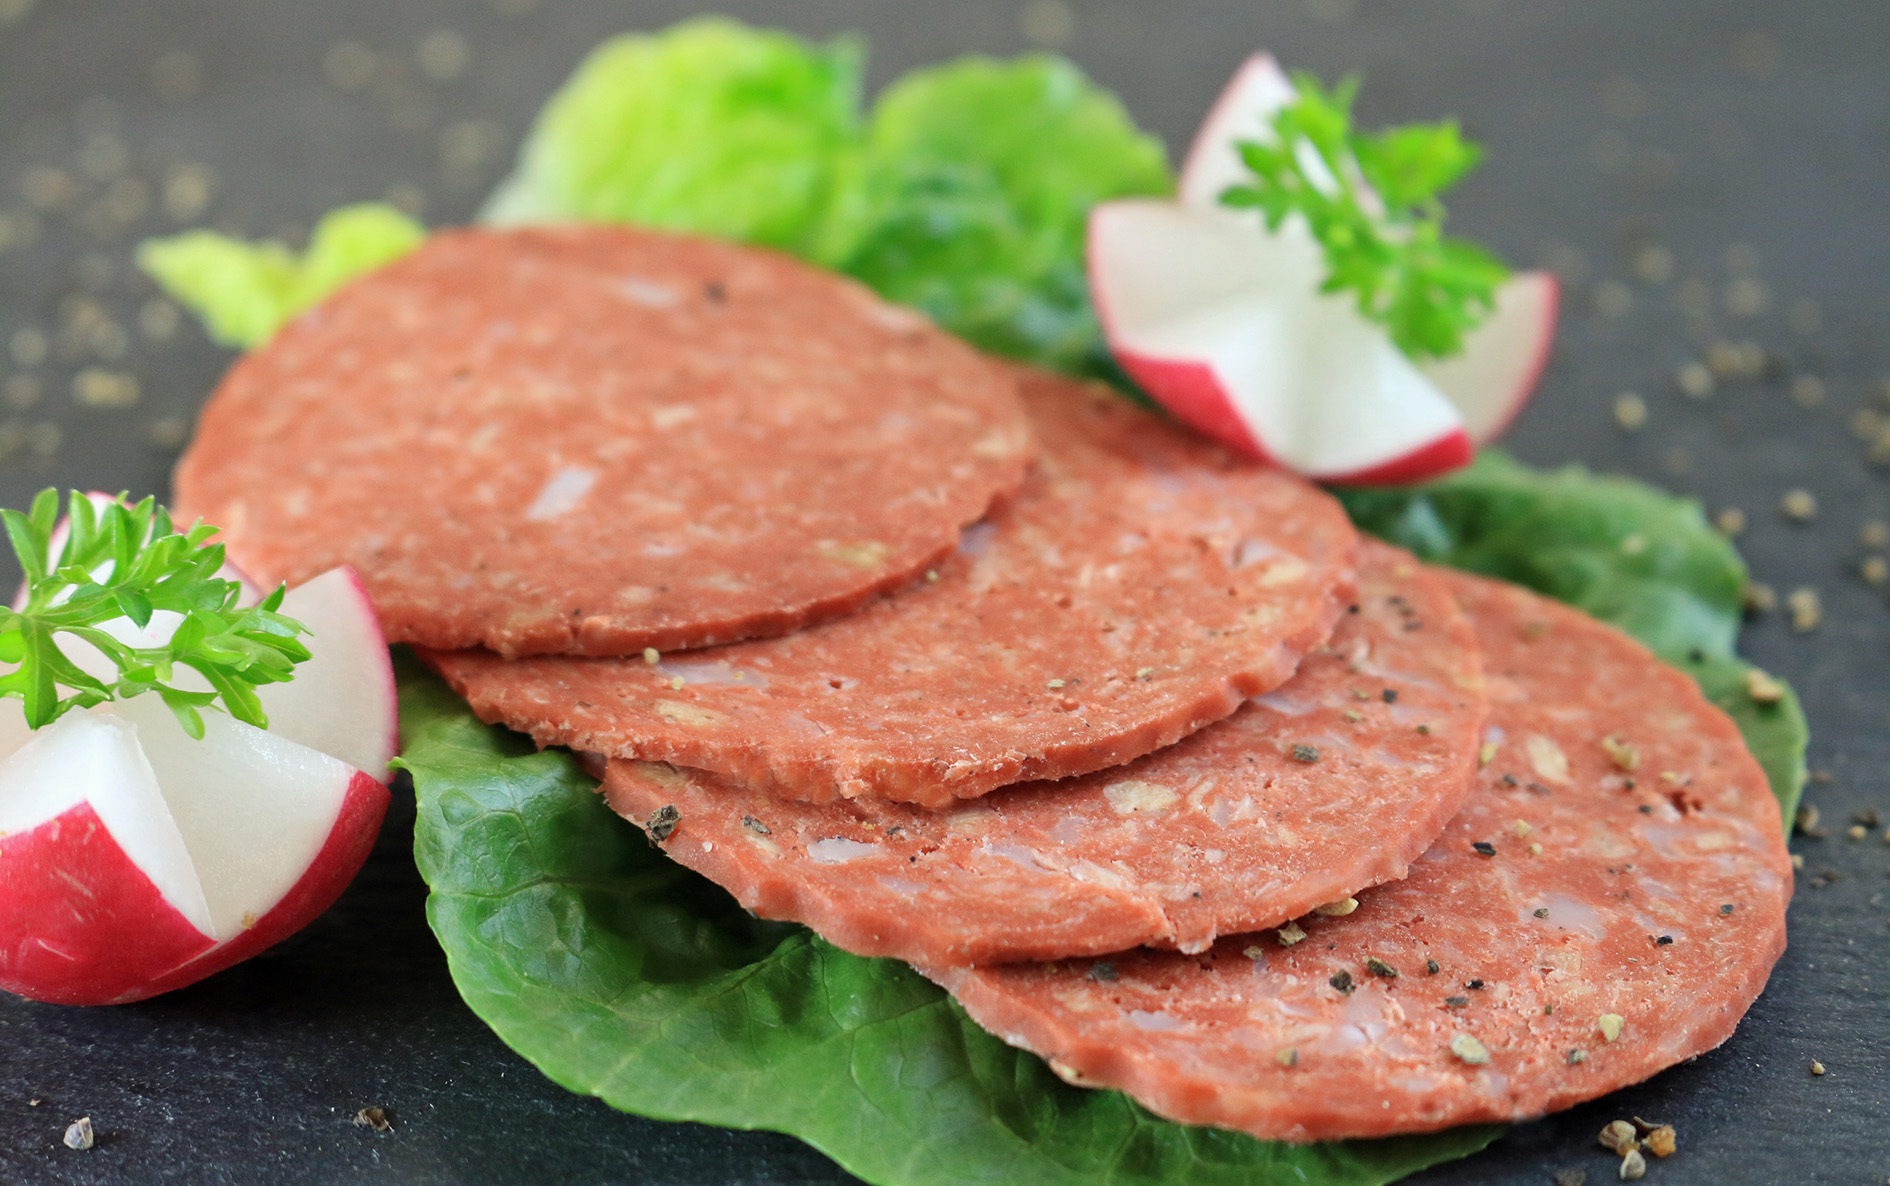 Loryma plant-based salami pieces; Crespel and Deiters